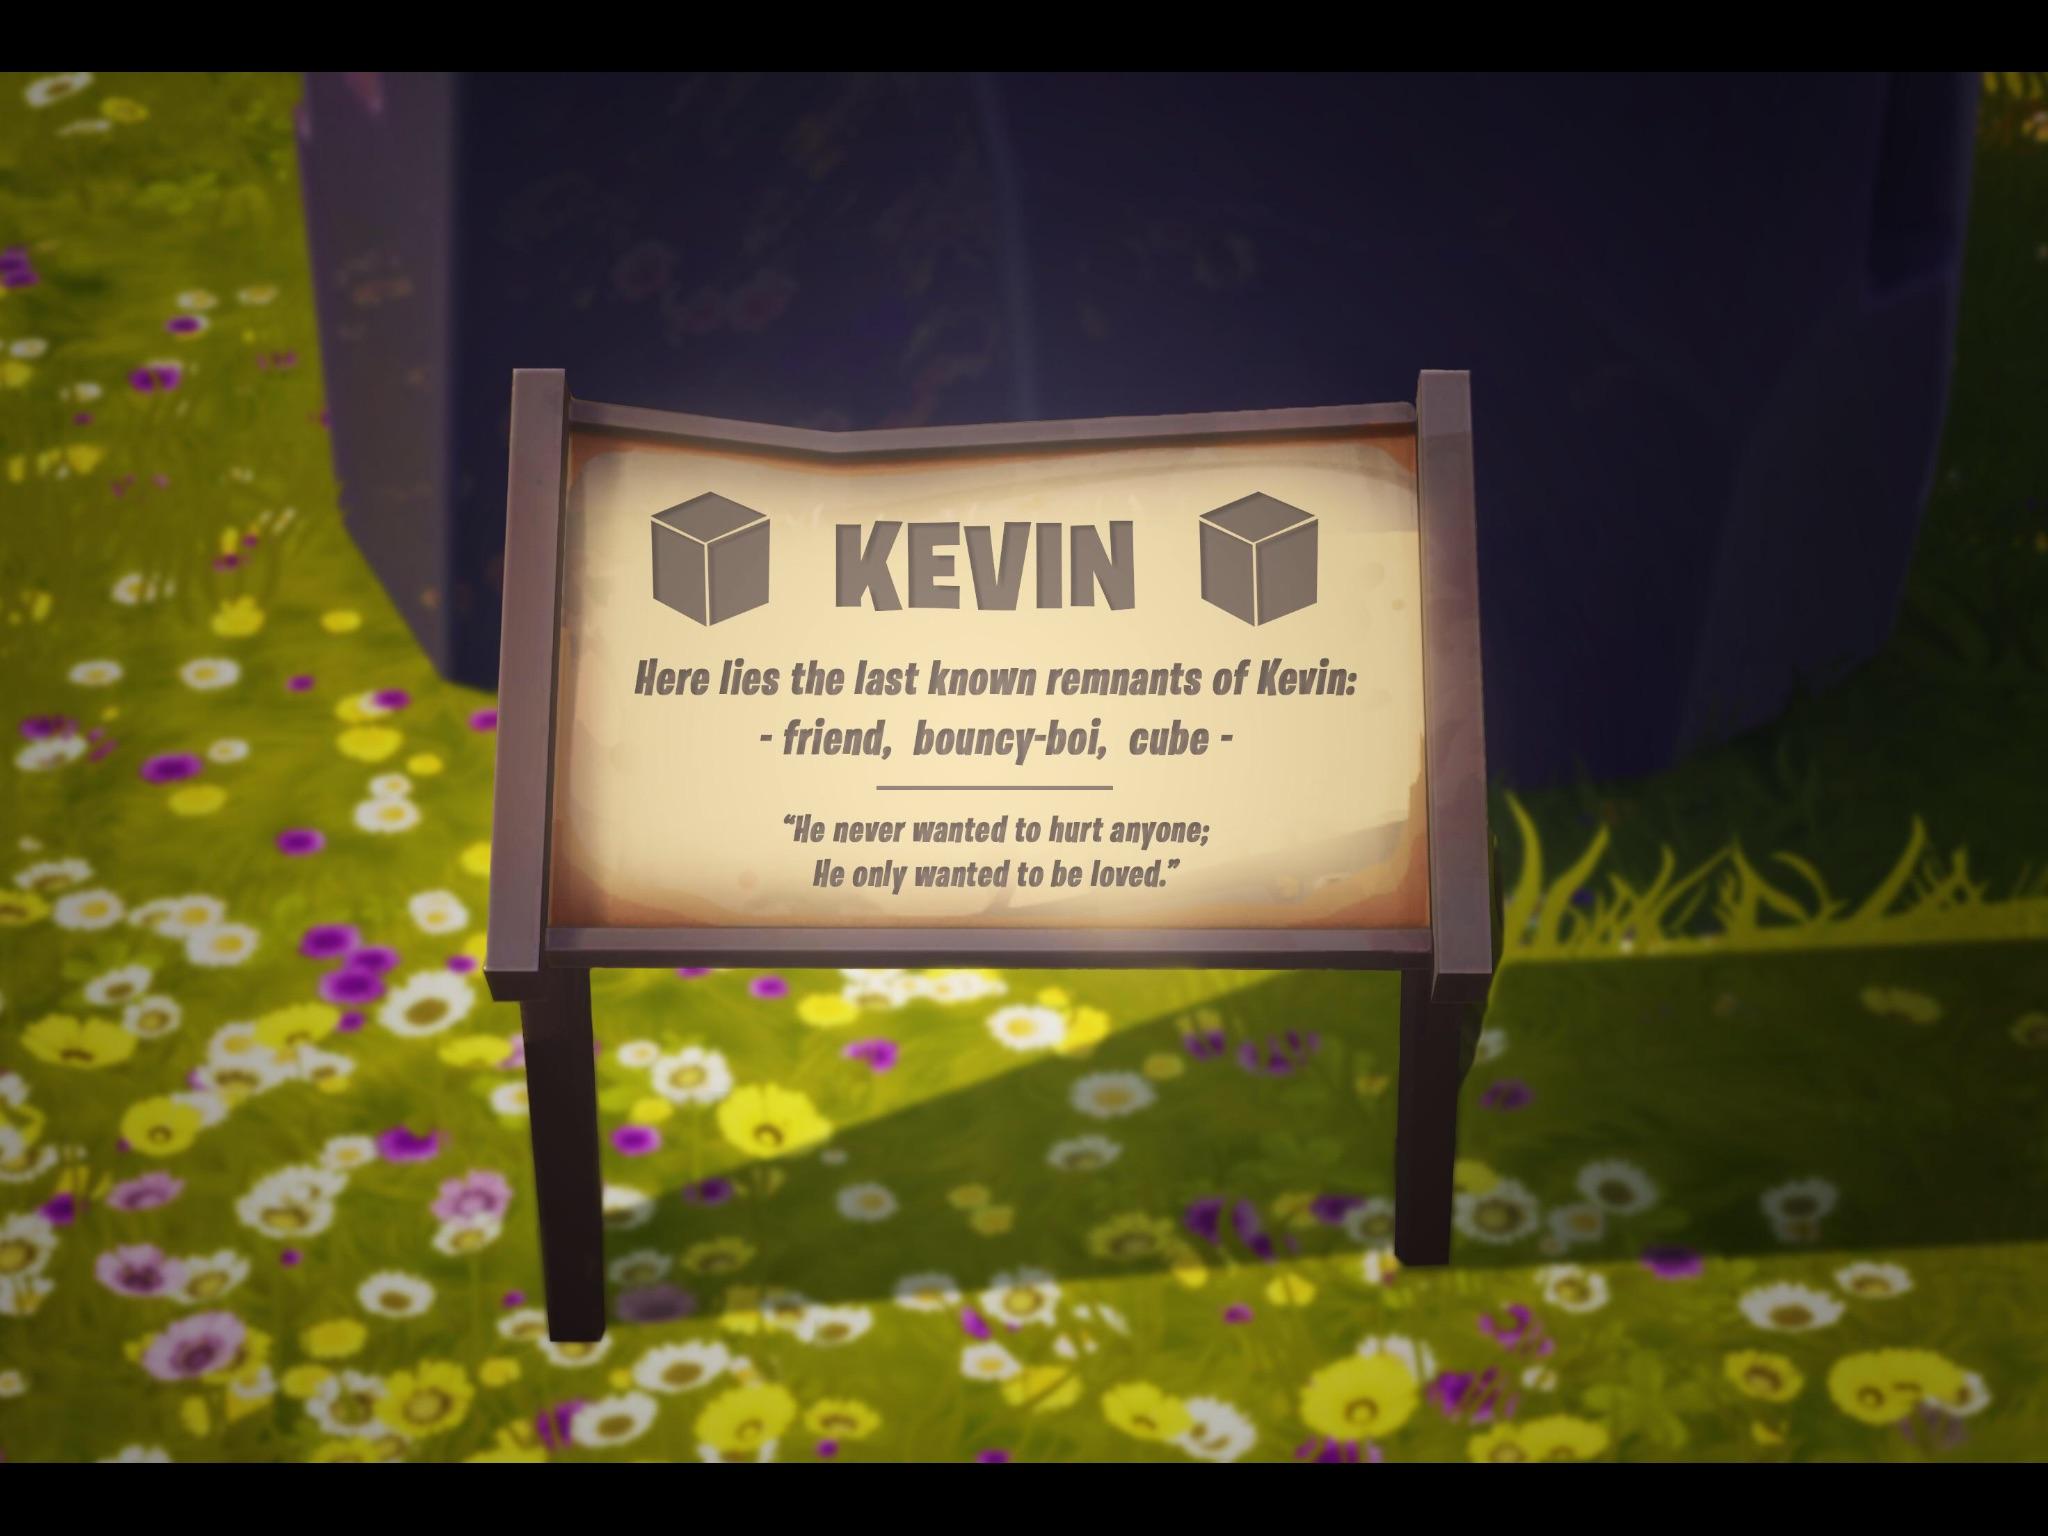 R.I.P Kevin